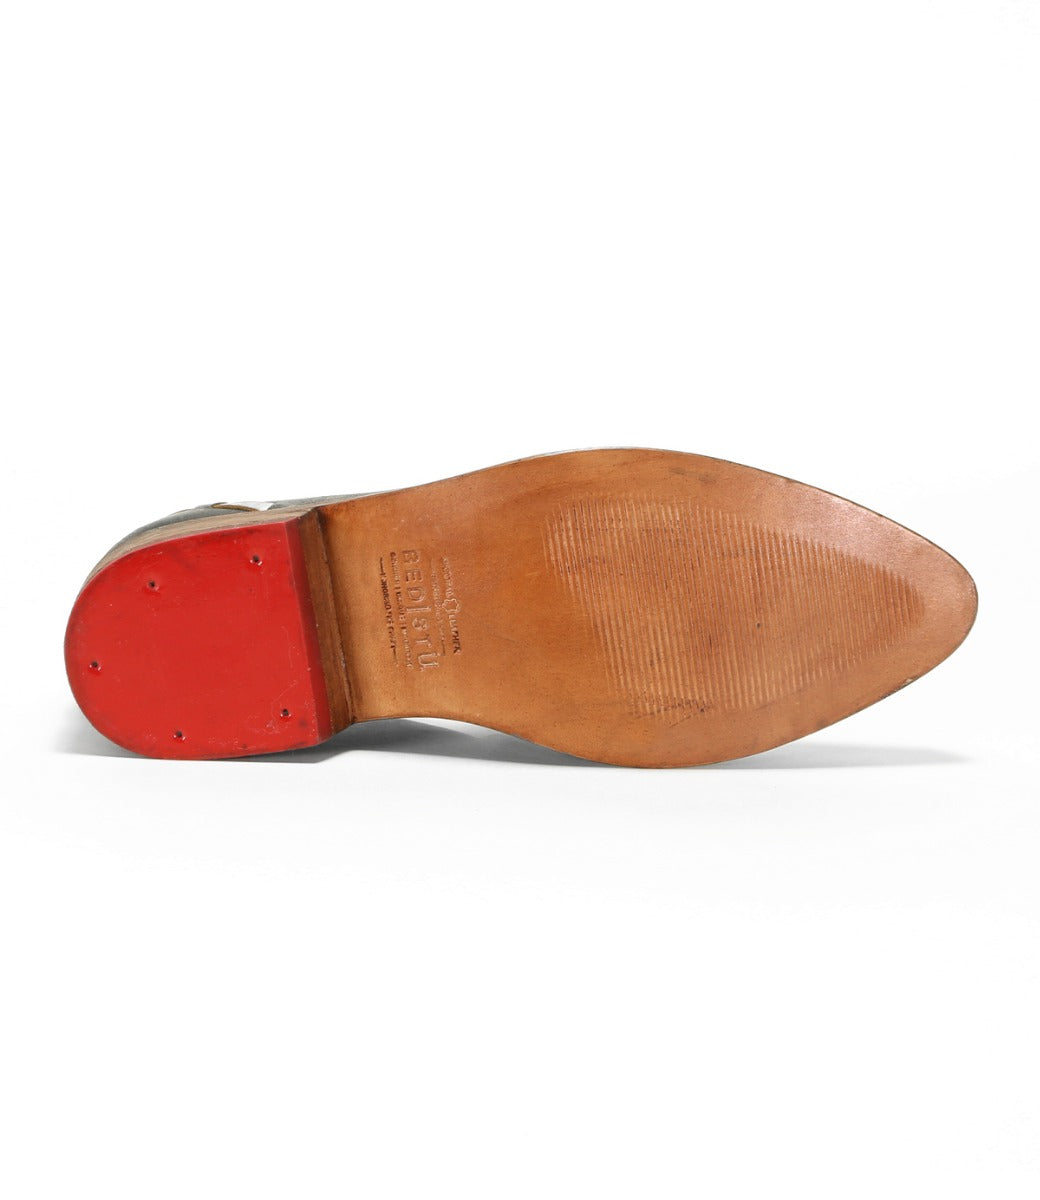 A pair of Neftis shoes with red soles on a white background from the Bed Stu brand.